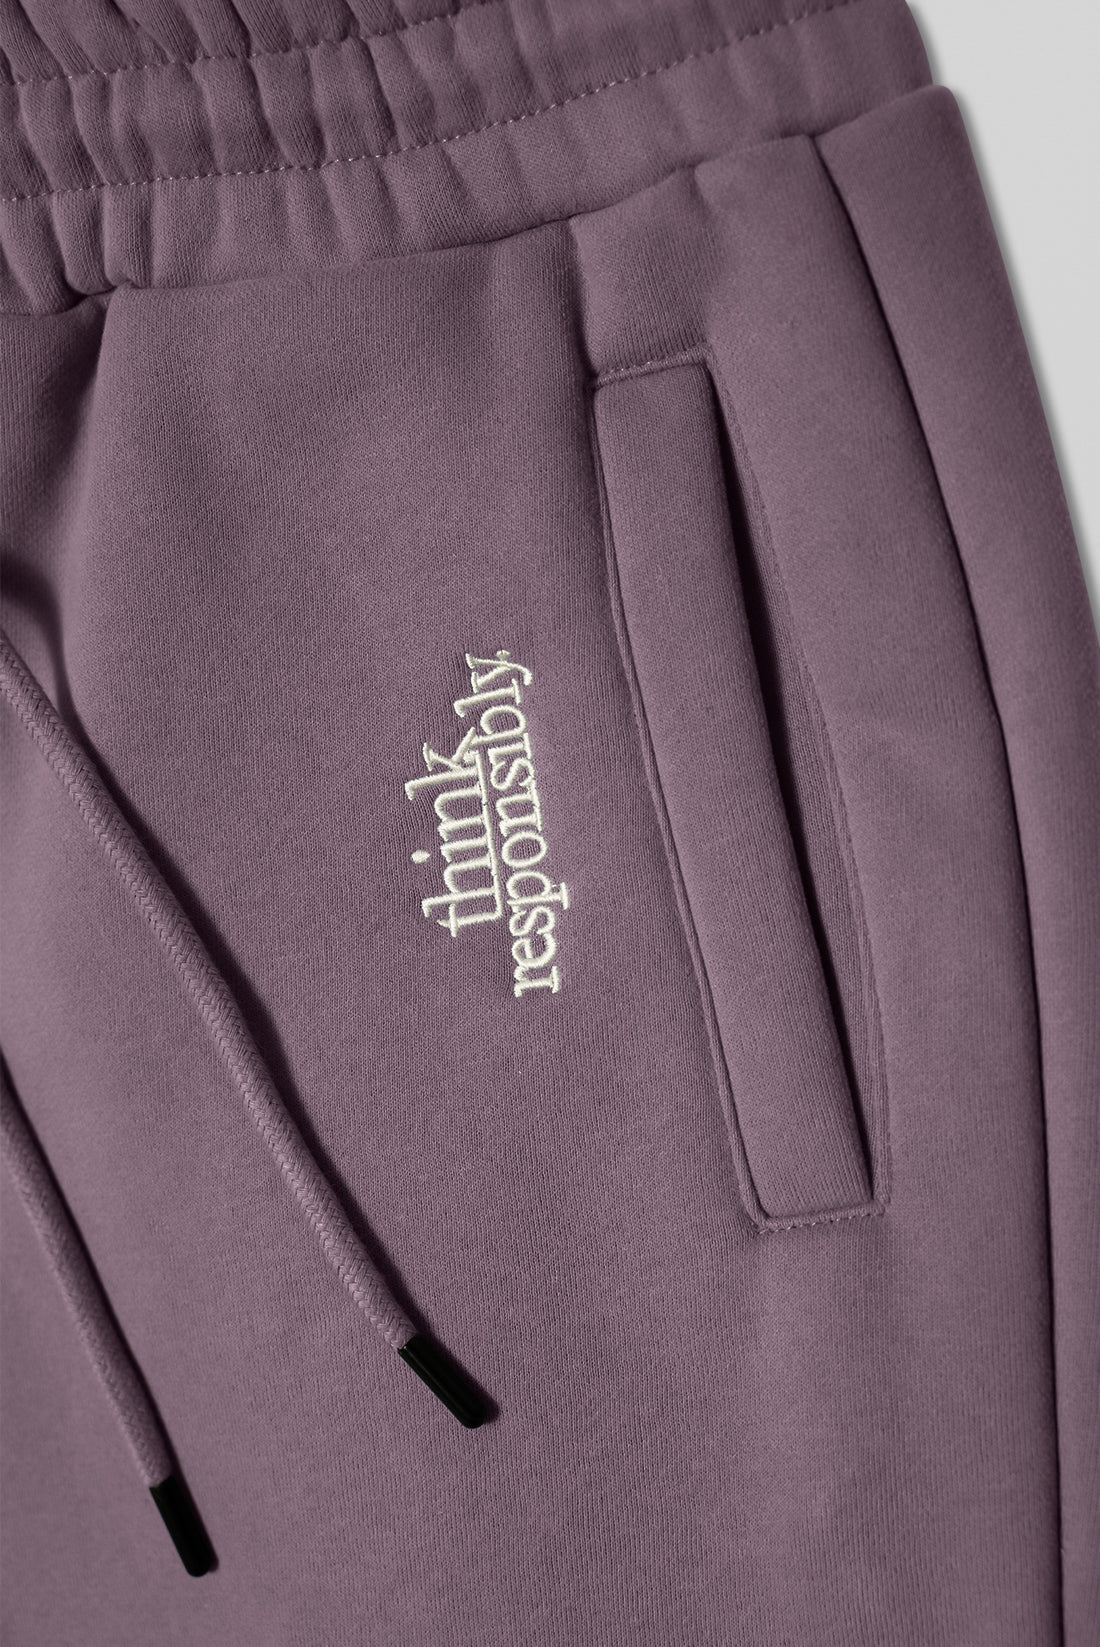 
                  
                    Think Responsibly Sweatsuit Soot Purple
                  
                